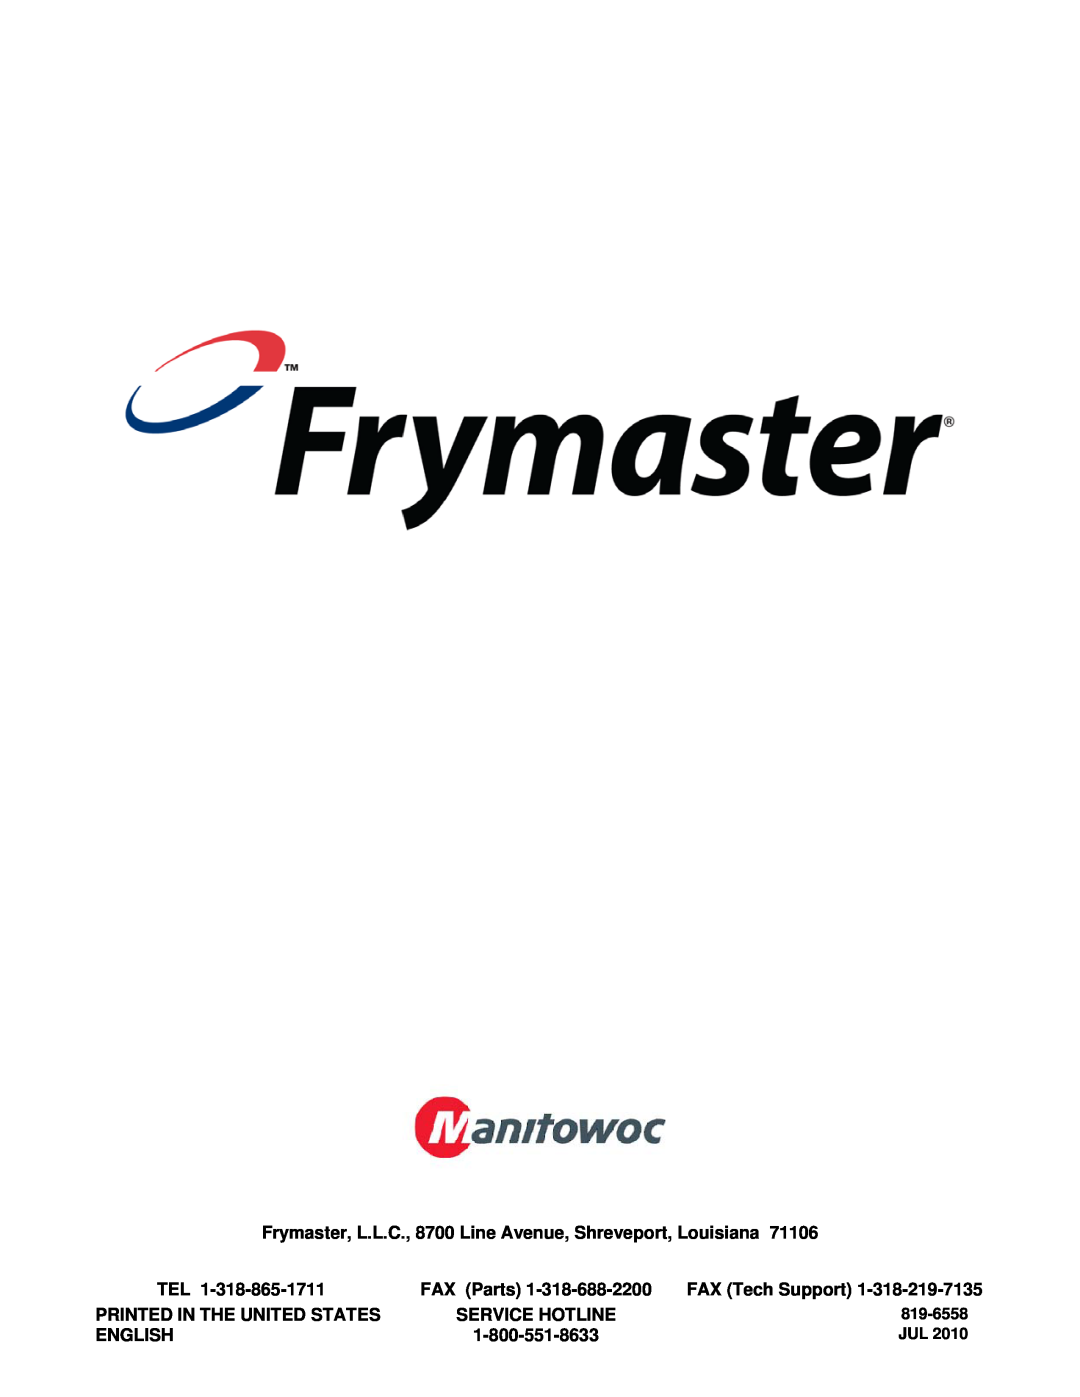 Frymaster 1814 operation manual FAX Parts, FAX Tech Support, Service Hotline, English, 819-6558 